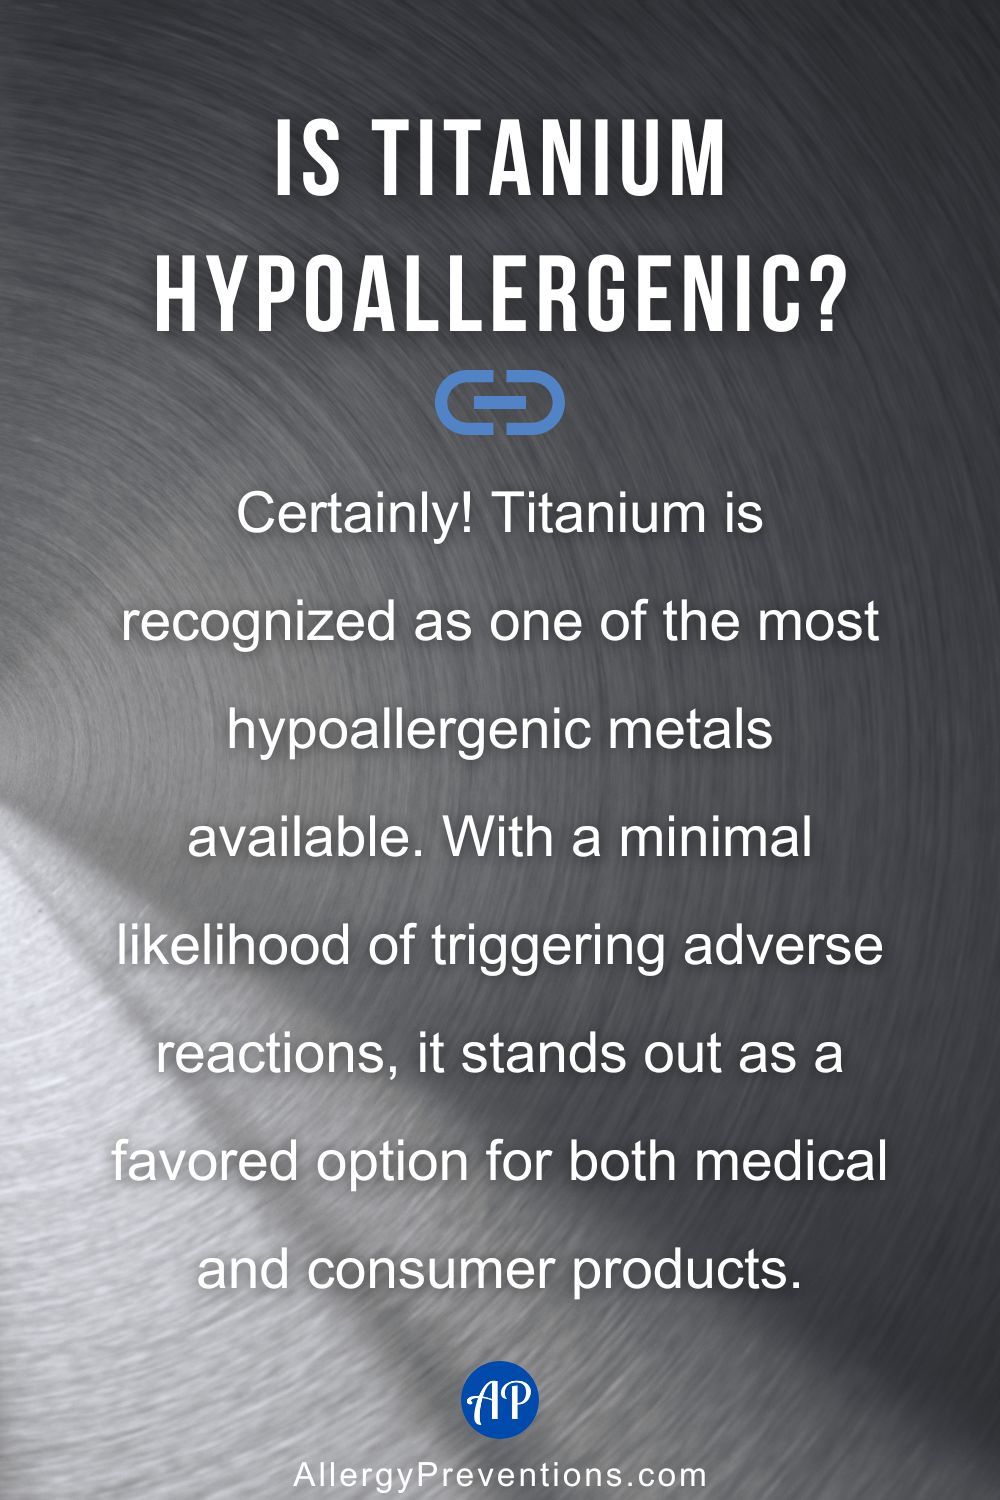 Is titanium hypoallergenic infographic: Is titanium hypoallergenic? Certainly! Titanium is recognized as one of the most hypoallergenic metals available. With a minimal likelihood of triggering adverse reactions, it stands out as a favored option for both medical and consumer products.